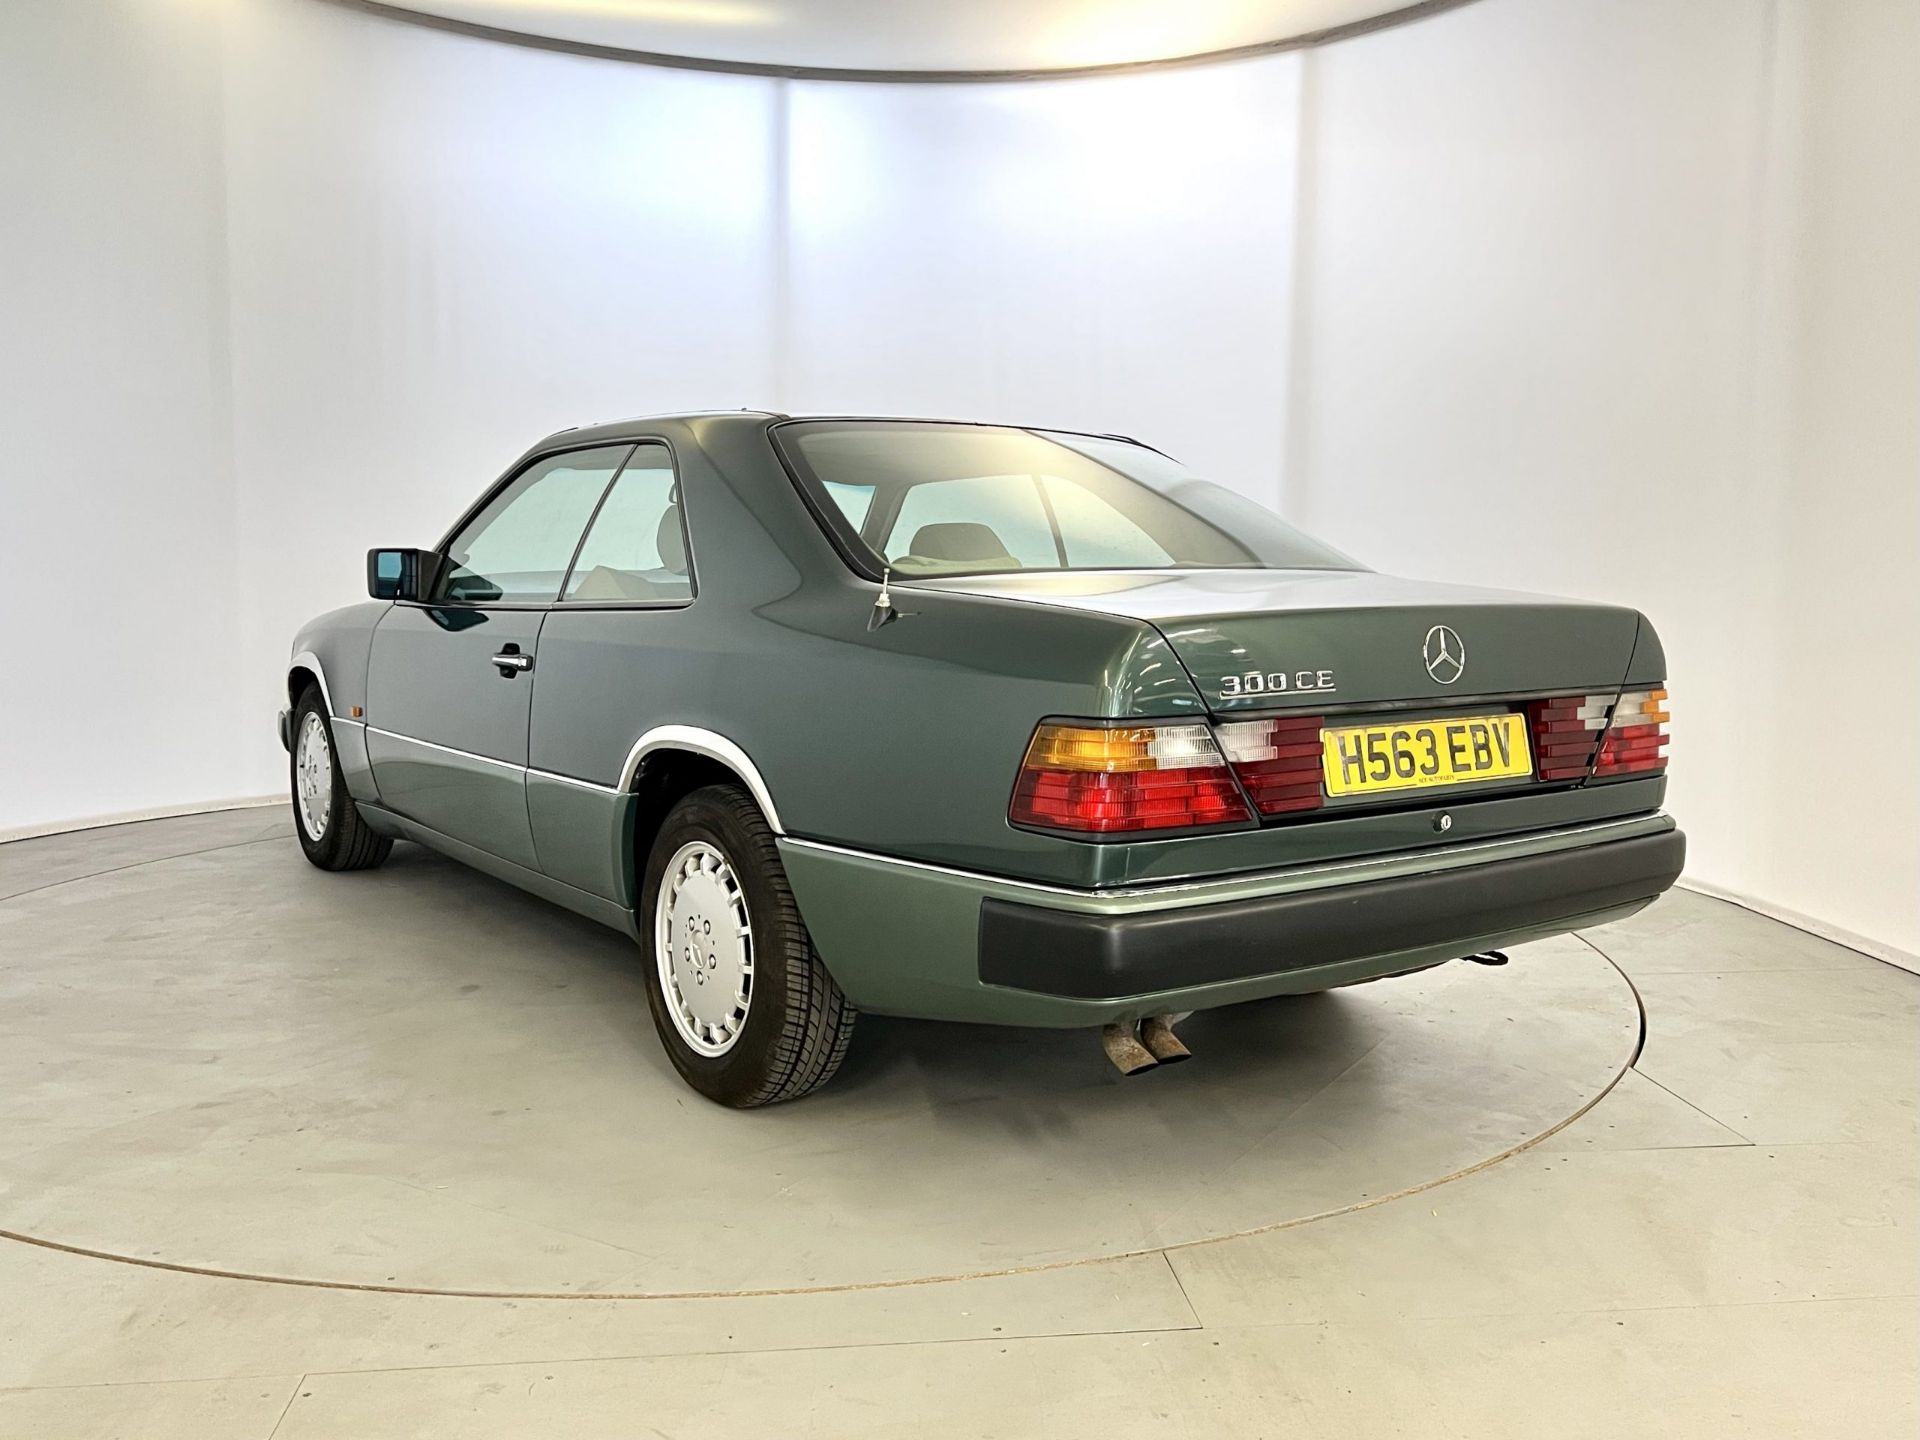 Mercedes 300CE - Image 7 of 30